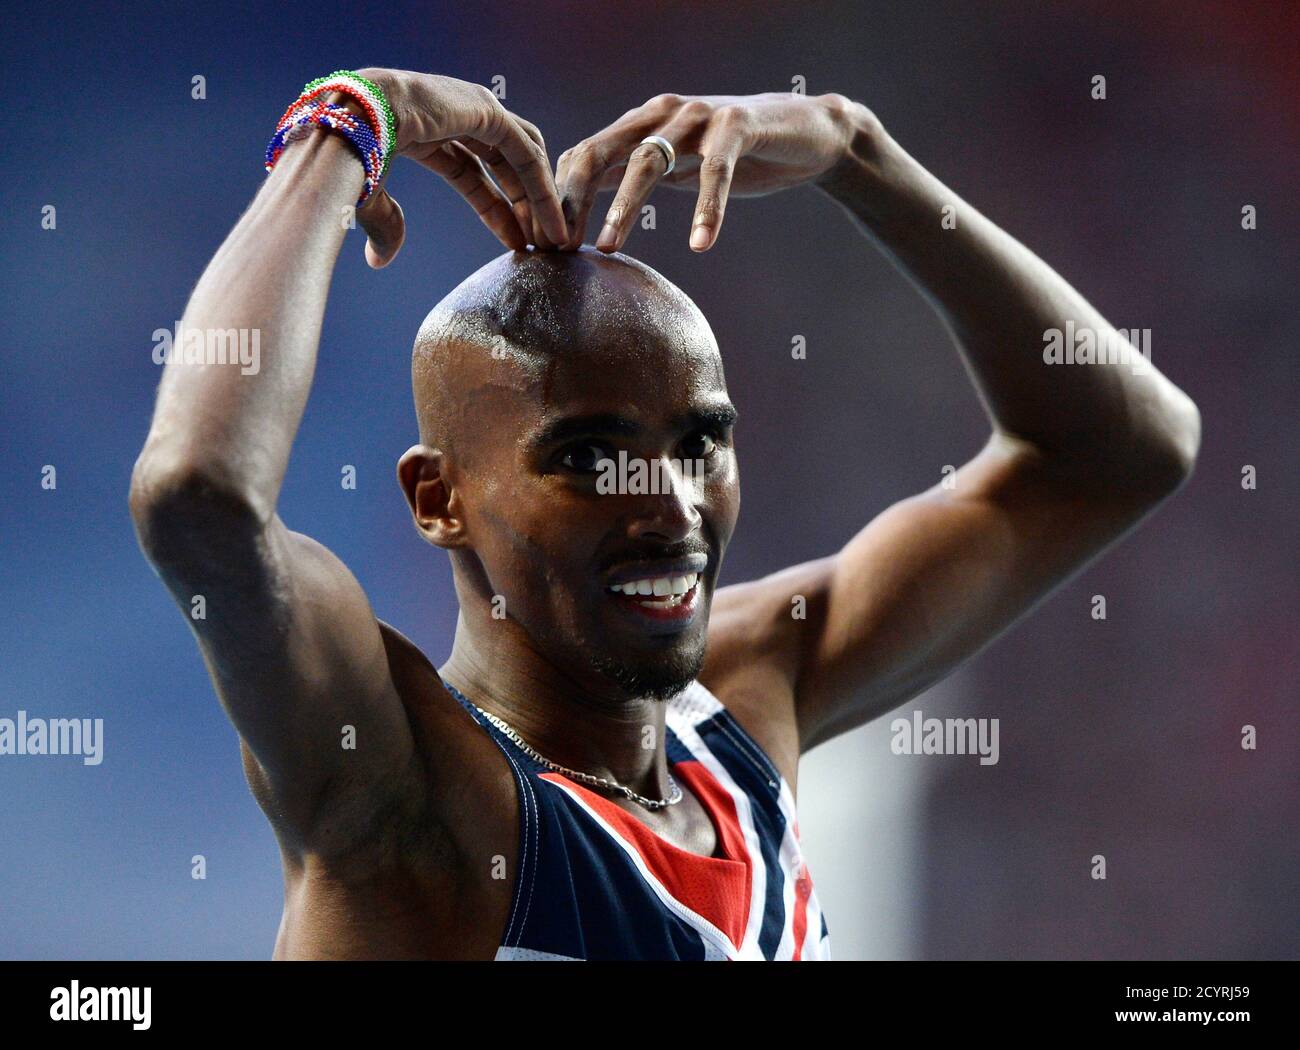 Mo Farah of Britain makes the 'Mobot' pose as he celebrates winning the  men's 5,000 metres final during the IAAF World Athletics Championships at  the Luzhniki stadium in Moscow August 16, 2013.